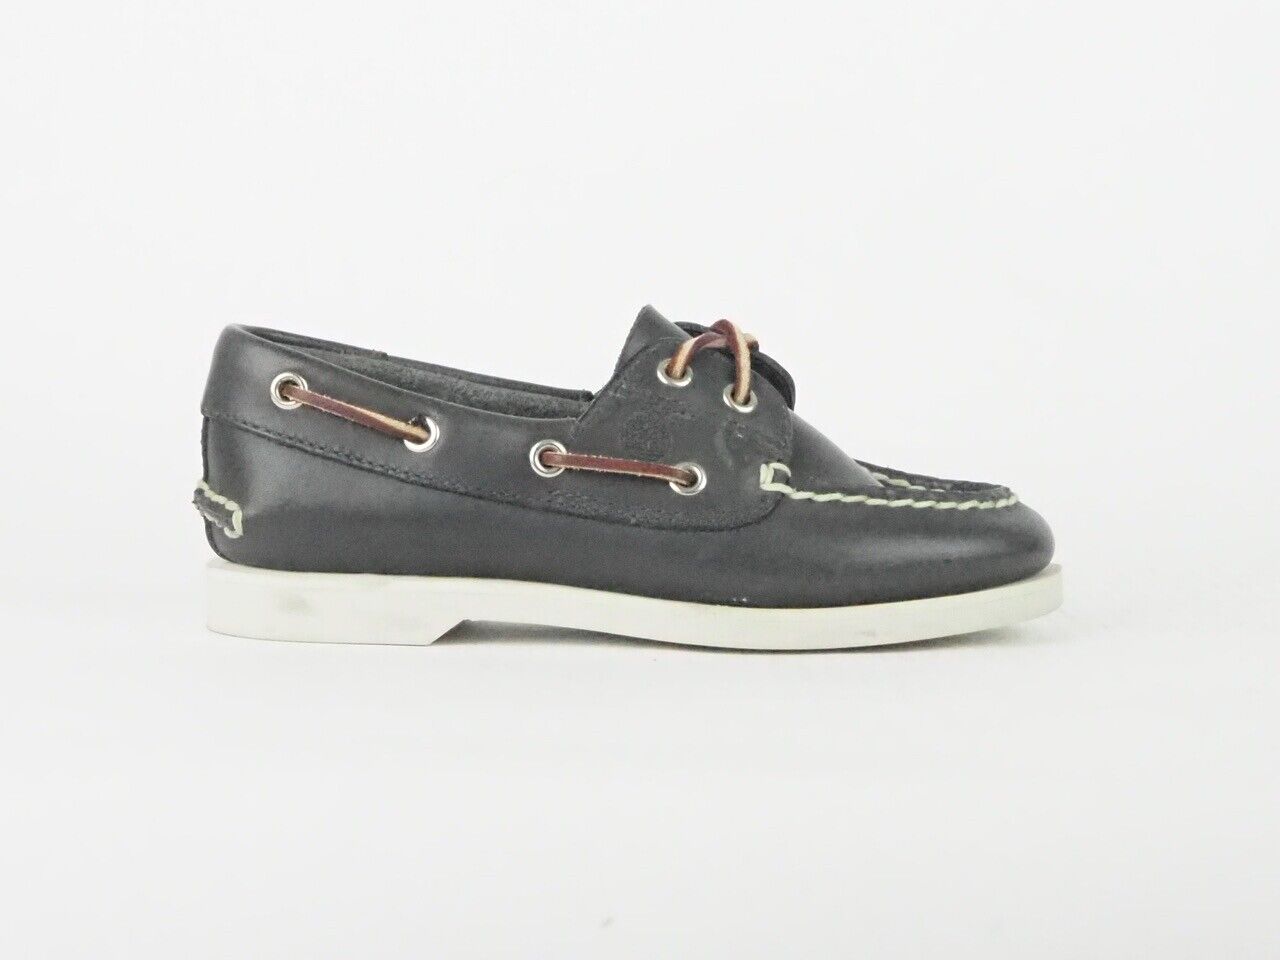 Kids Timberland Classic 2 Eye Boat 25732 Navy Blue Leather Slip On Shoes